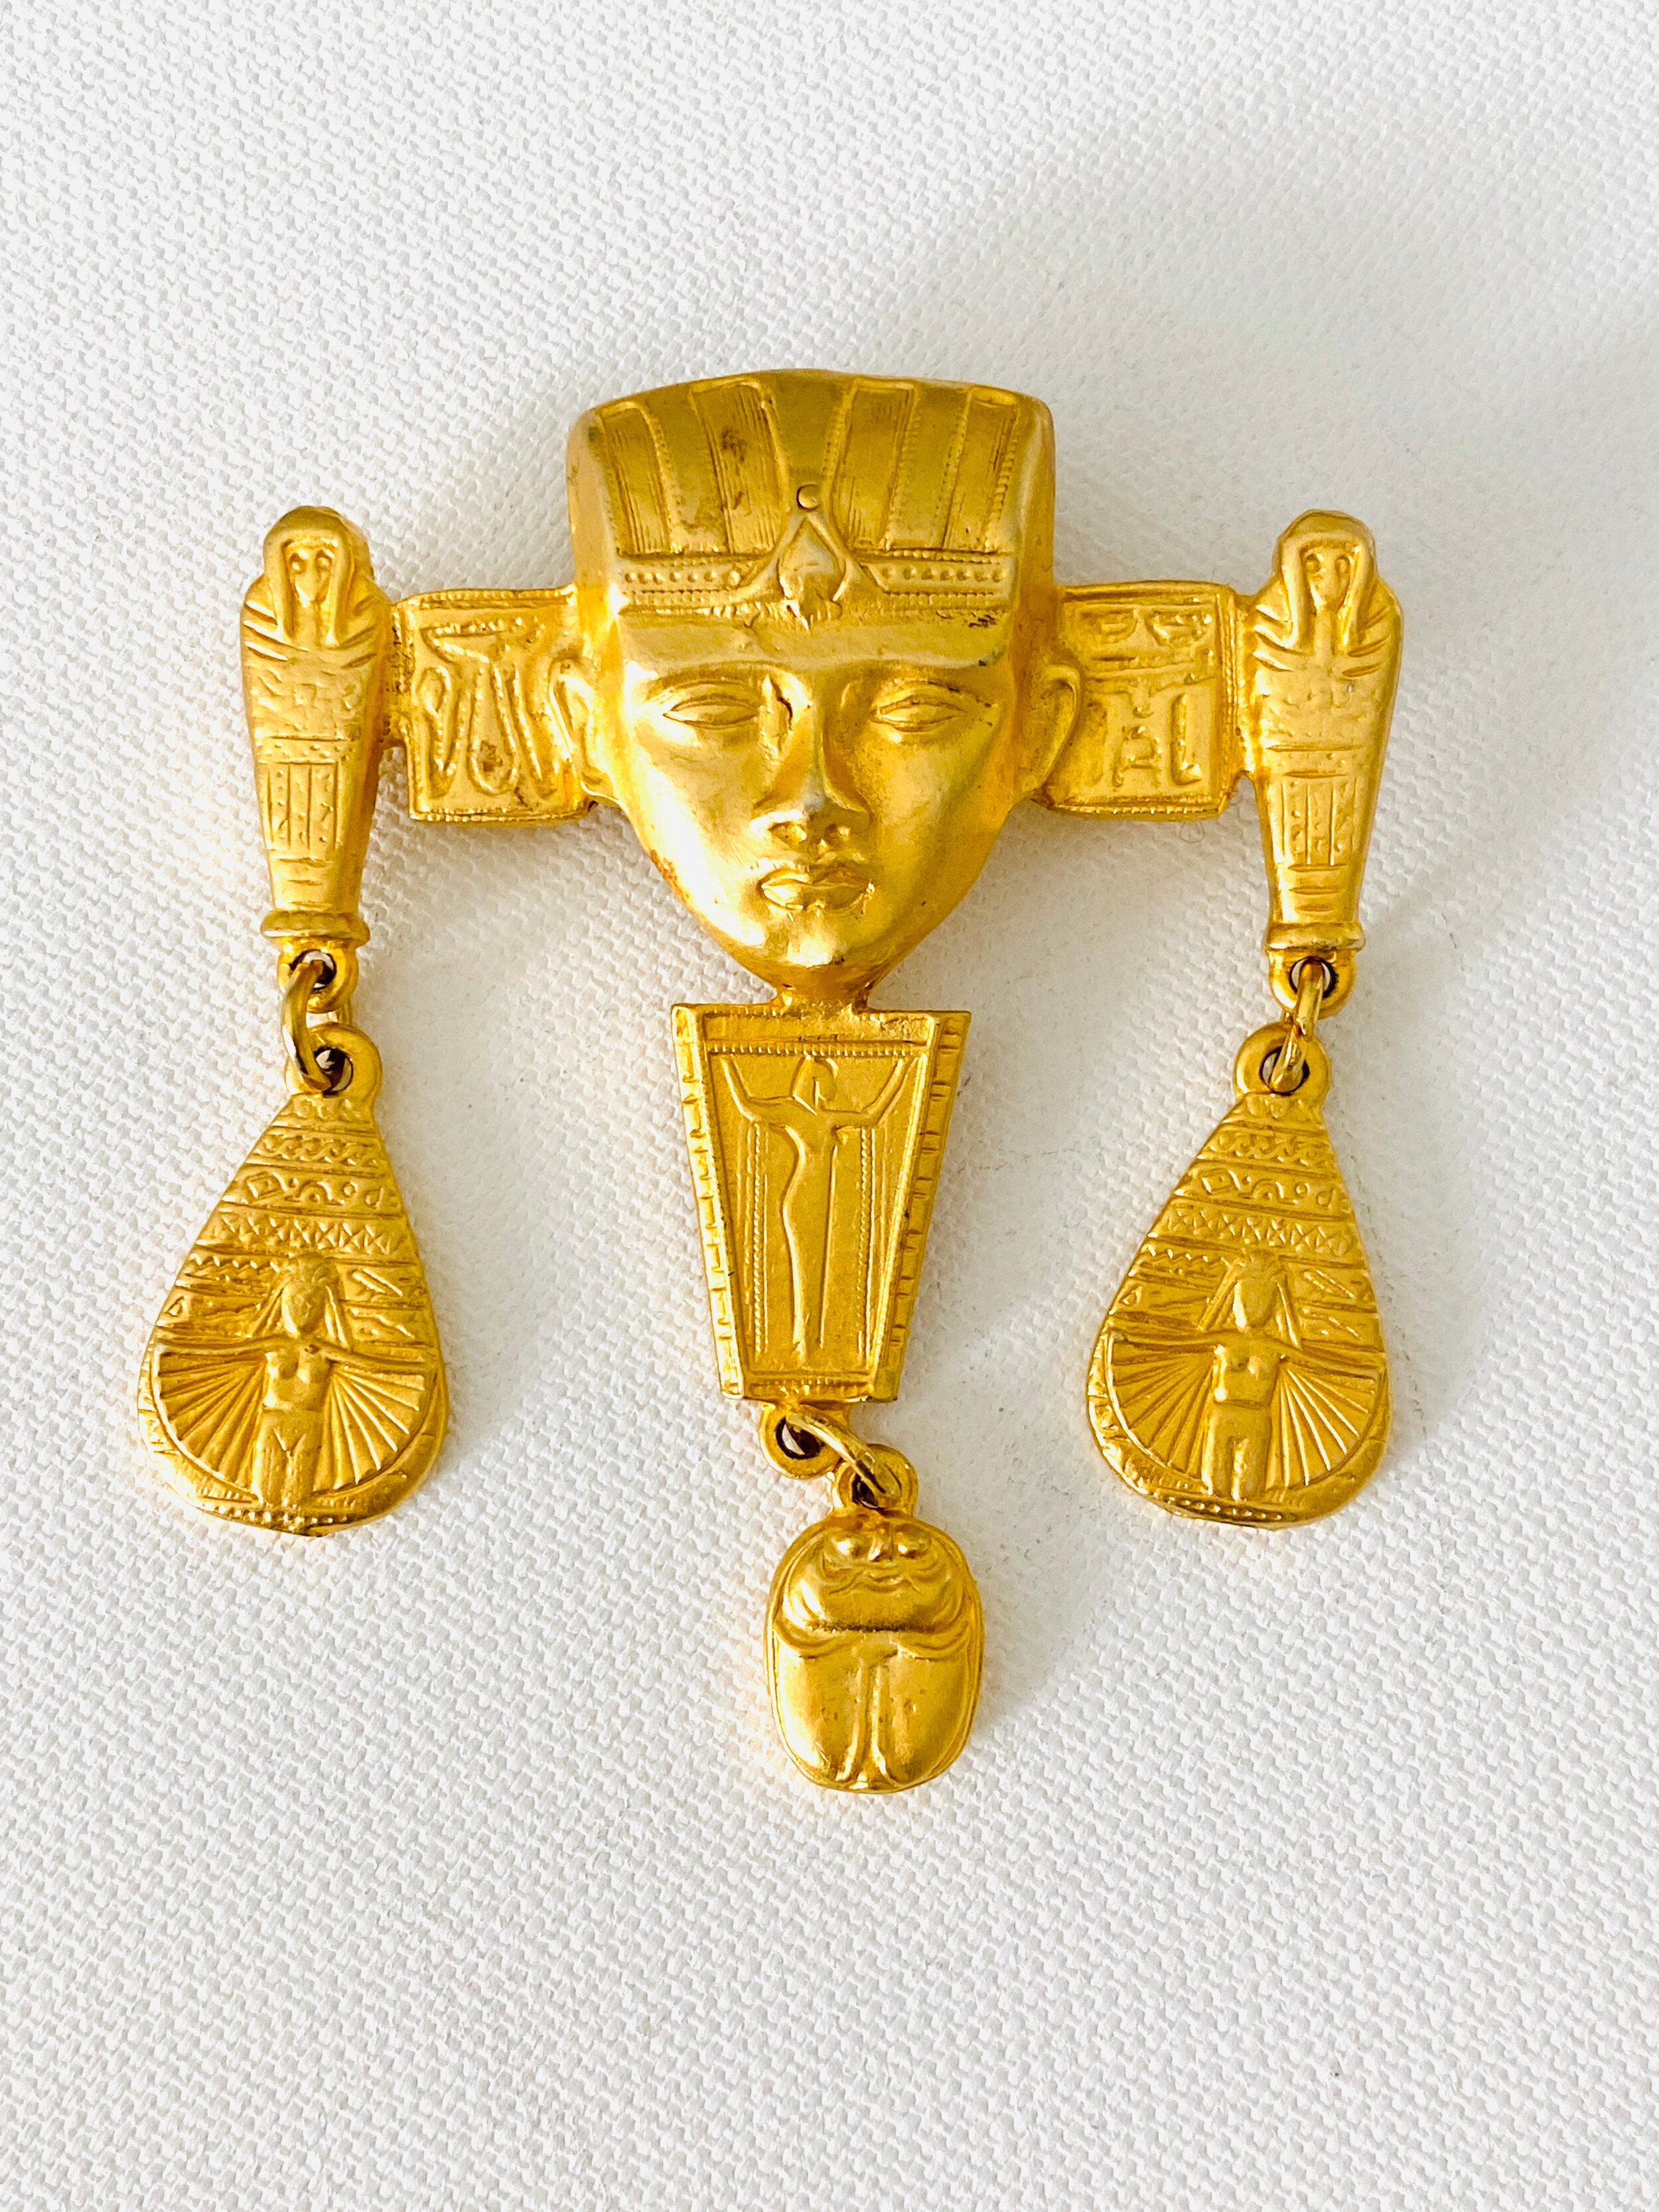 Egyptian Scarab Brooch/pendant Necklace Inspired by Louis -  Denmark